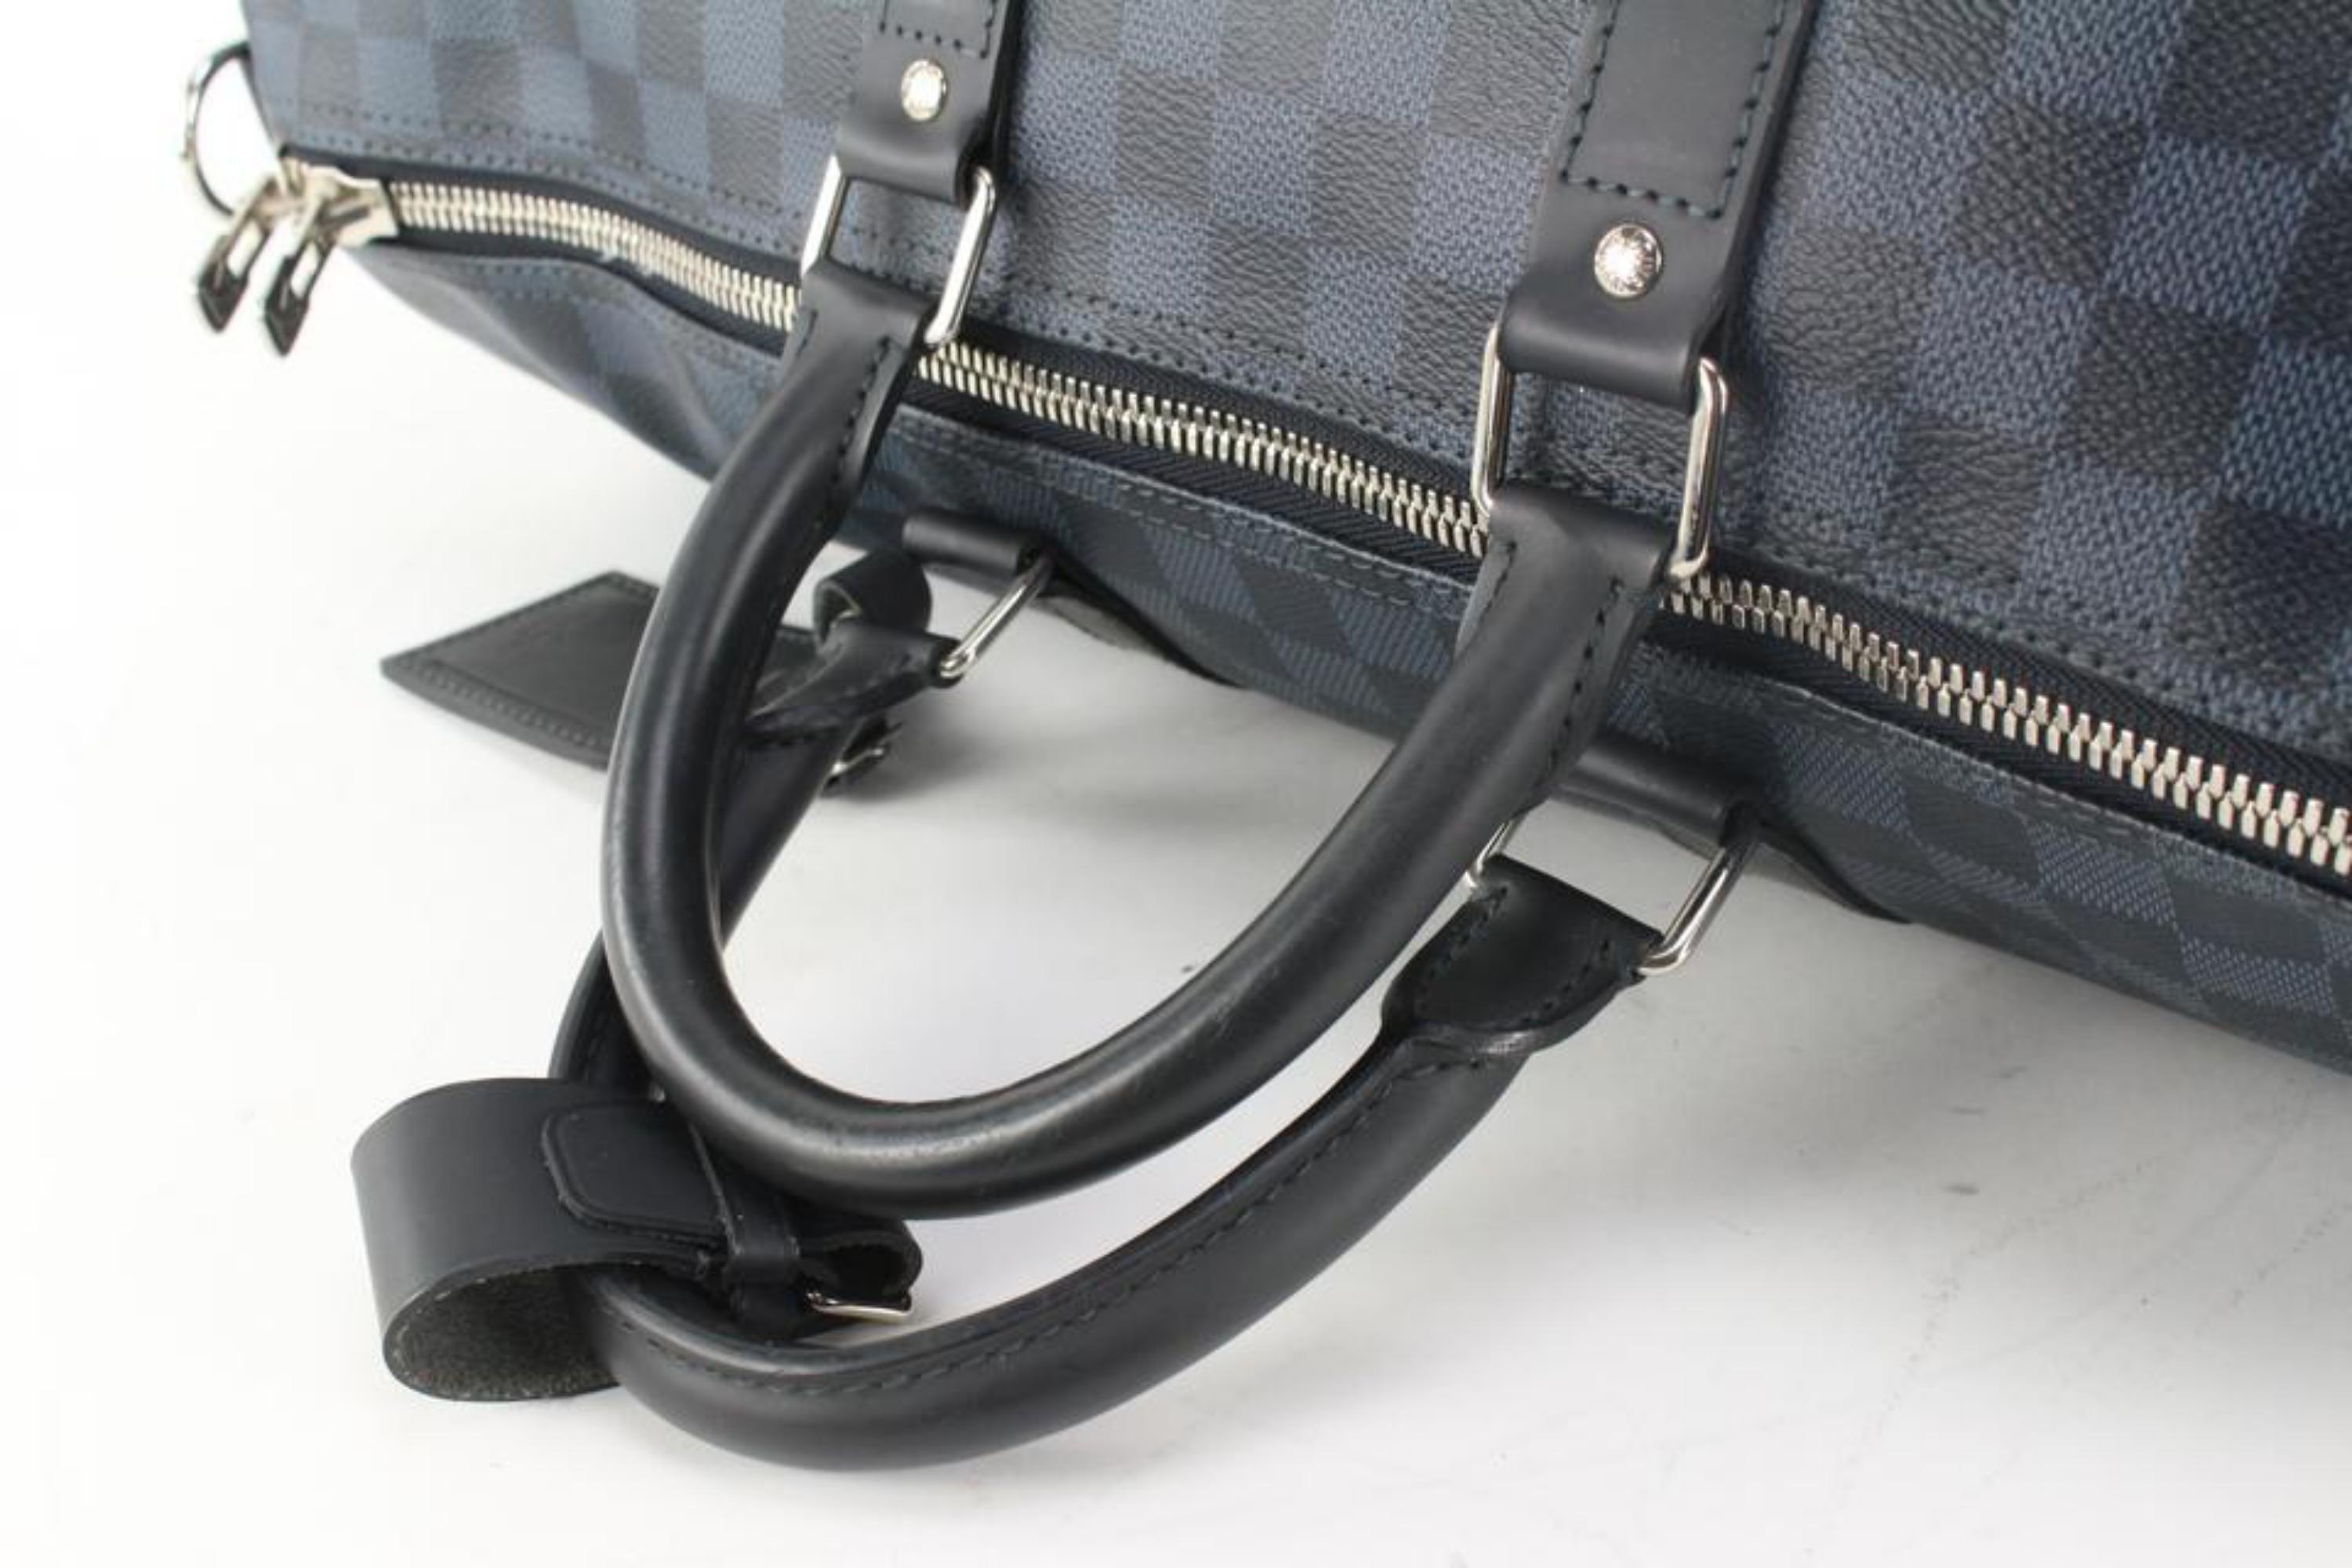 Louis Vuitton Rare Blue Damier Cobalt Keepall Bandouliere 45 Duffle Bag 13lz531s In Good Condition For Sale In Dix hills, NY